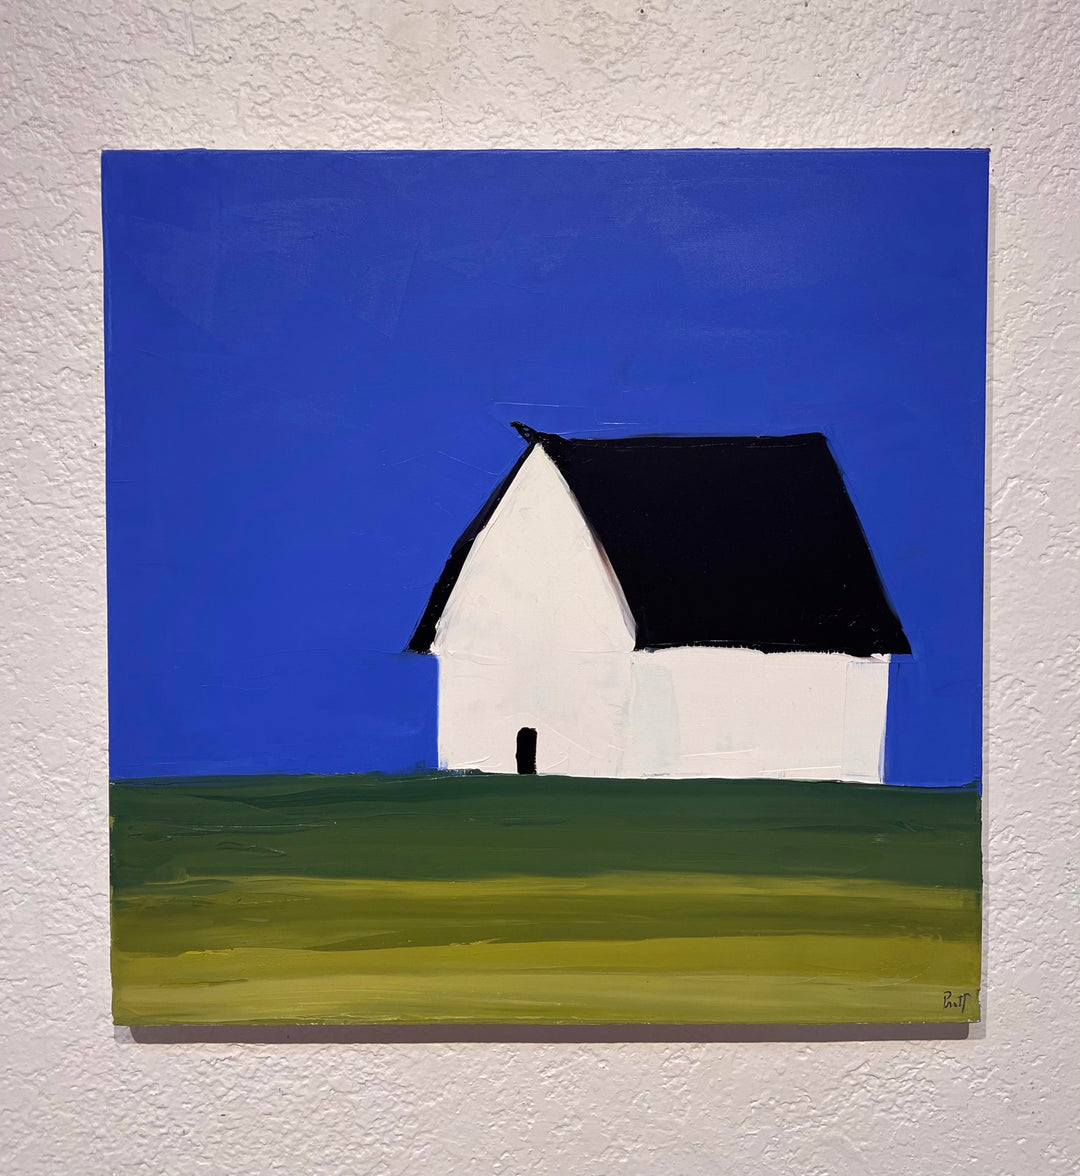 This oil on canvas painting by Sandra Pratt portrays a serene scene of the Sandra Pratt - "White House" standing proudly on a green field.